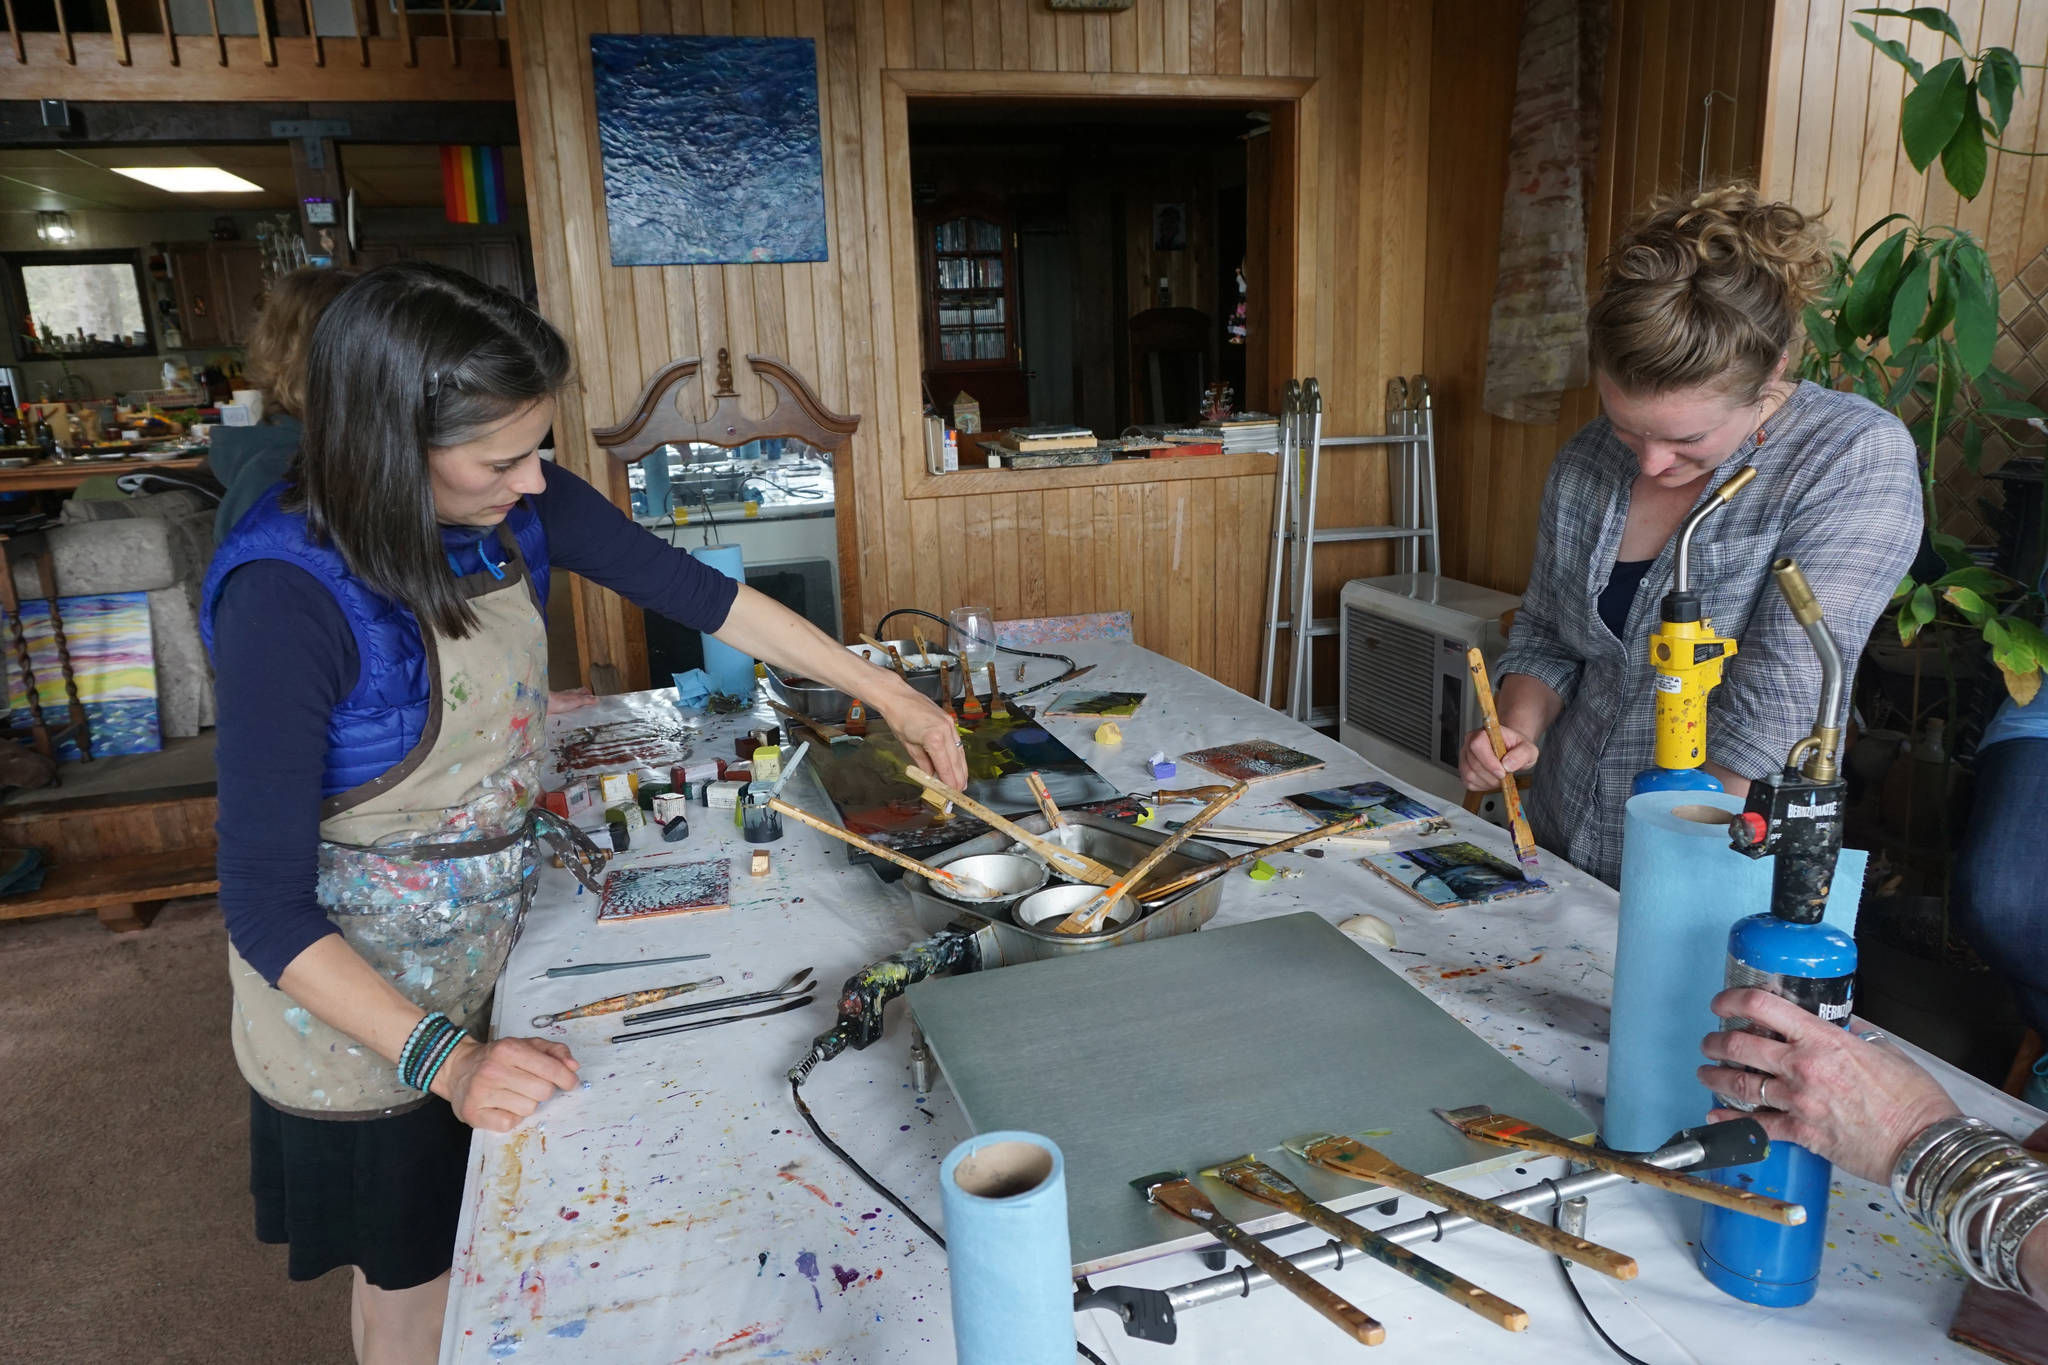 Carla Klinker-Cope., left, and Becca Bottebaum paint with encaustics in Ann-Margret Wimmerstedt’s “Wax. Wine & Wimmerstedt”class held July 30, 2017 at Wimmerstedt’s home. Wimmerstedt, far right, reaches for a propane torch. The torch is used to manipulate the wax by melting it and also to fuse the finished painting. “Encaustic” means “to burn.” (Photo by Michael Armstrong/Homer News)